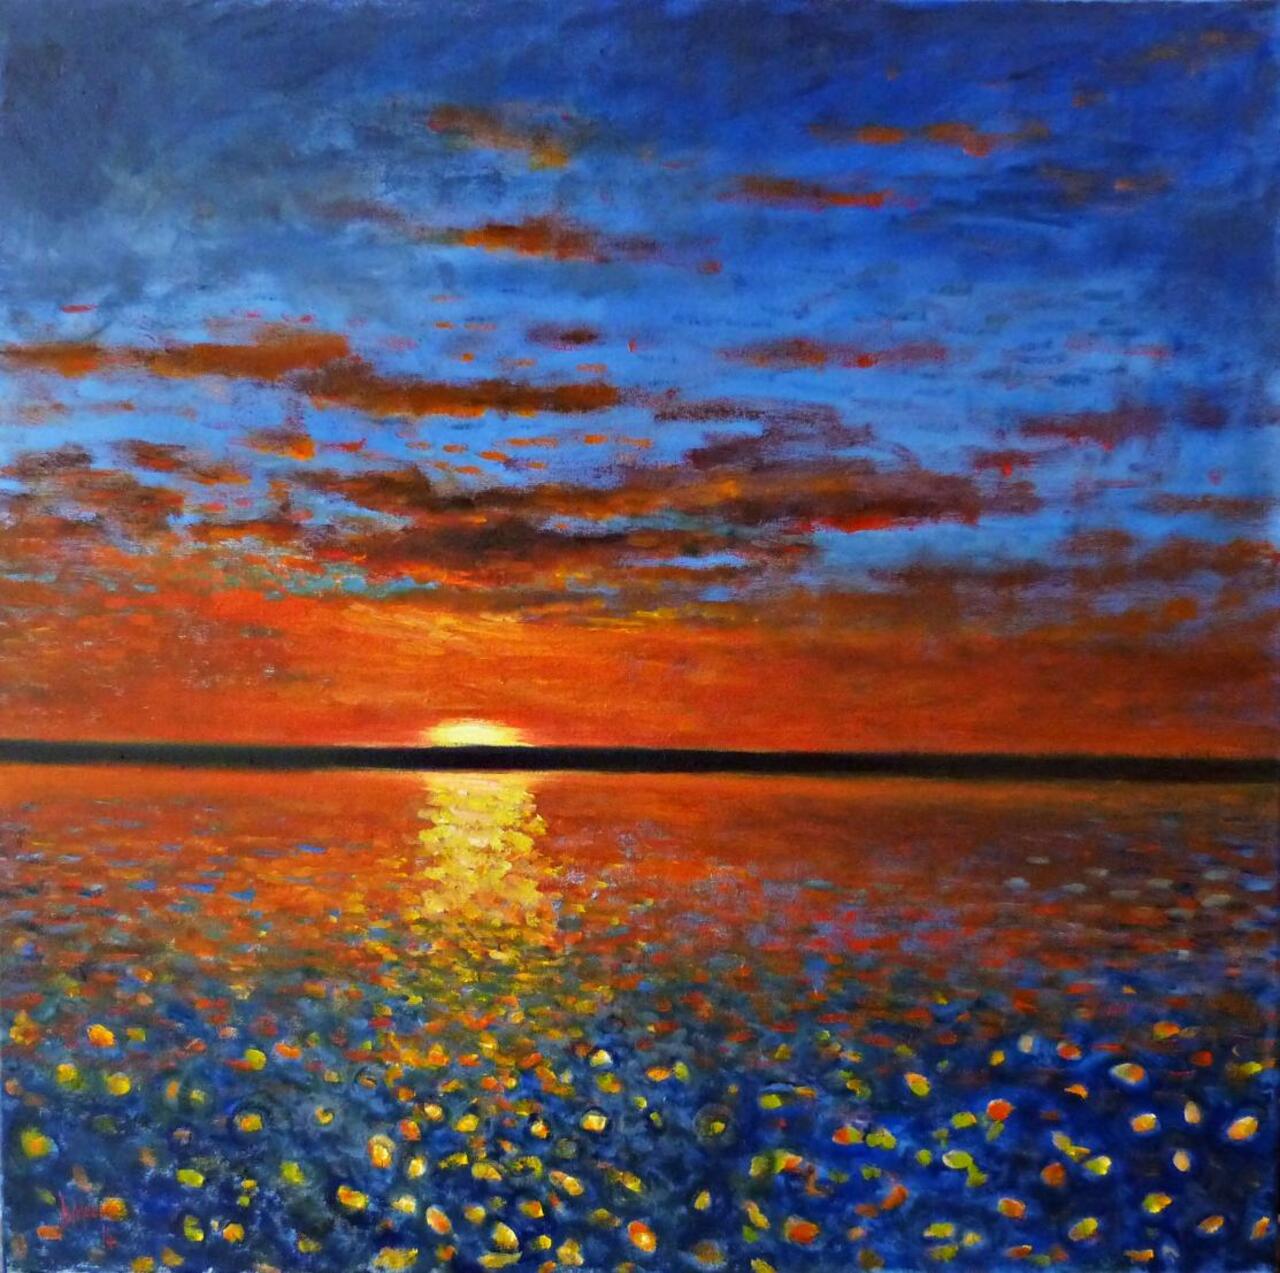 "Beautiful 'Bejewelled Ocean' by Dave Moore @DaveMooreArt oil. http://t.co/FOPxc442XJ #art #arte"